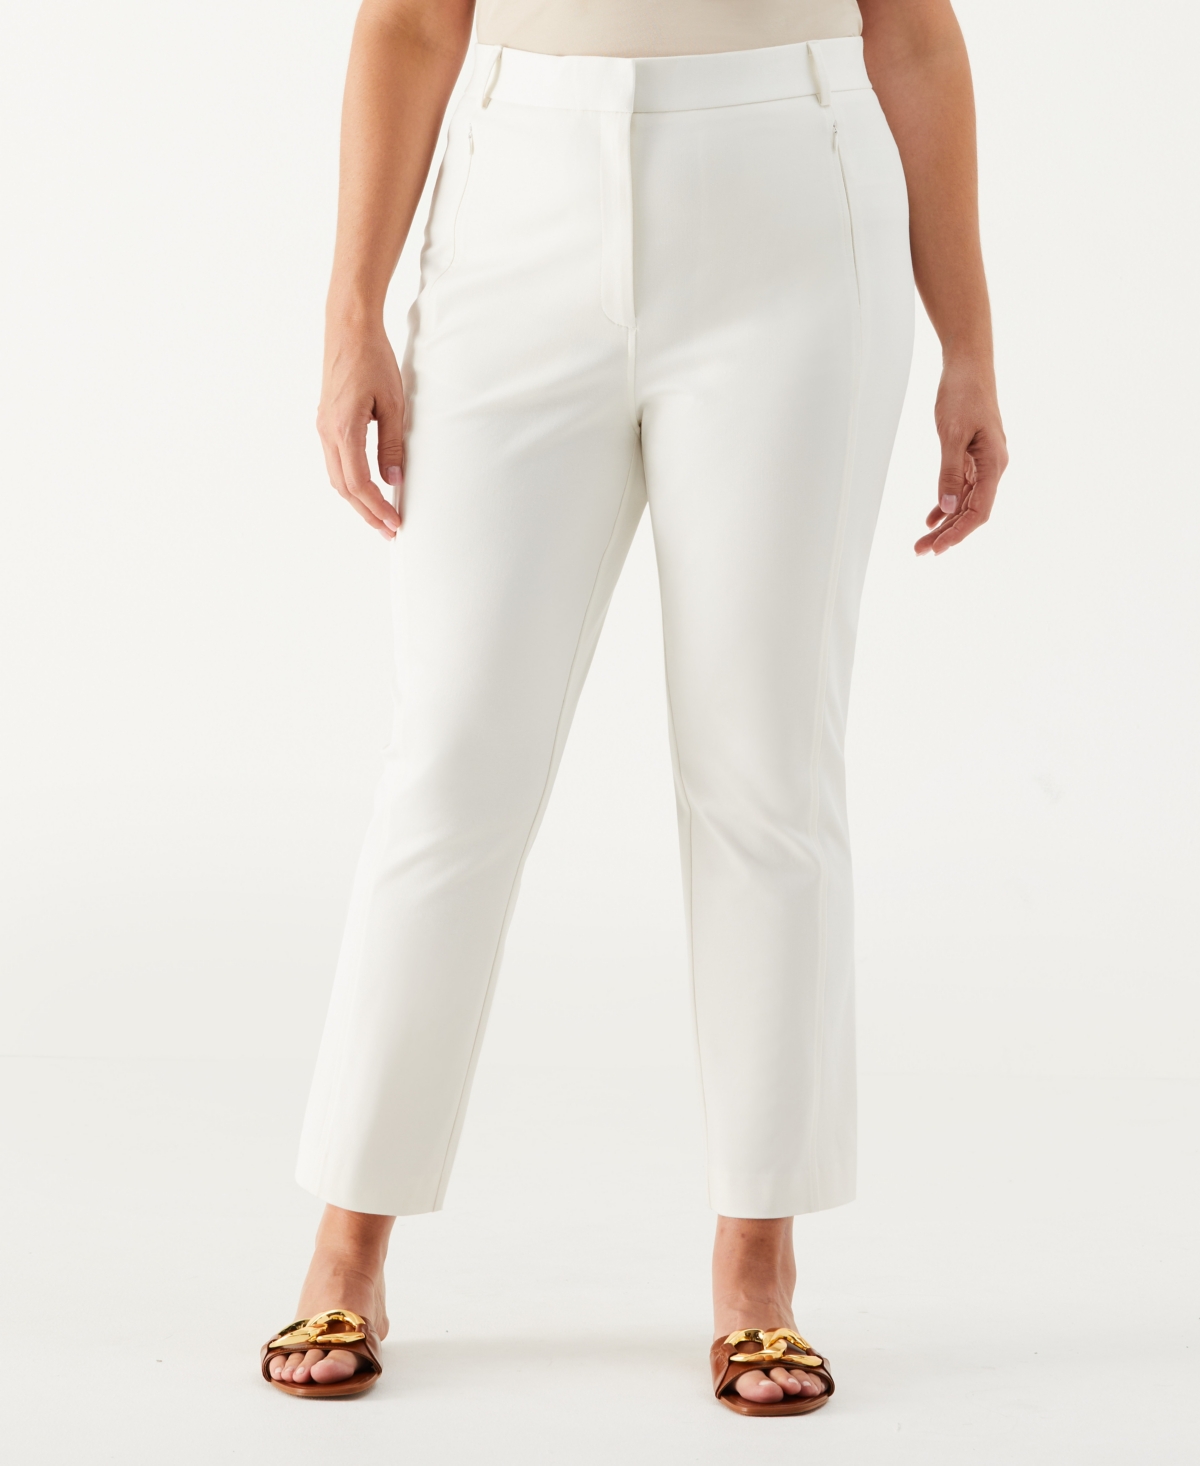 Plus Size Seamed Ankle Pant - Star White